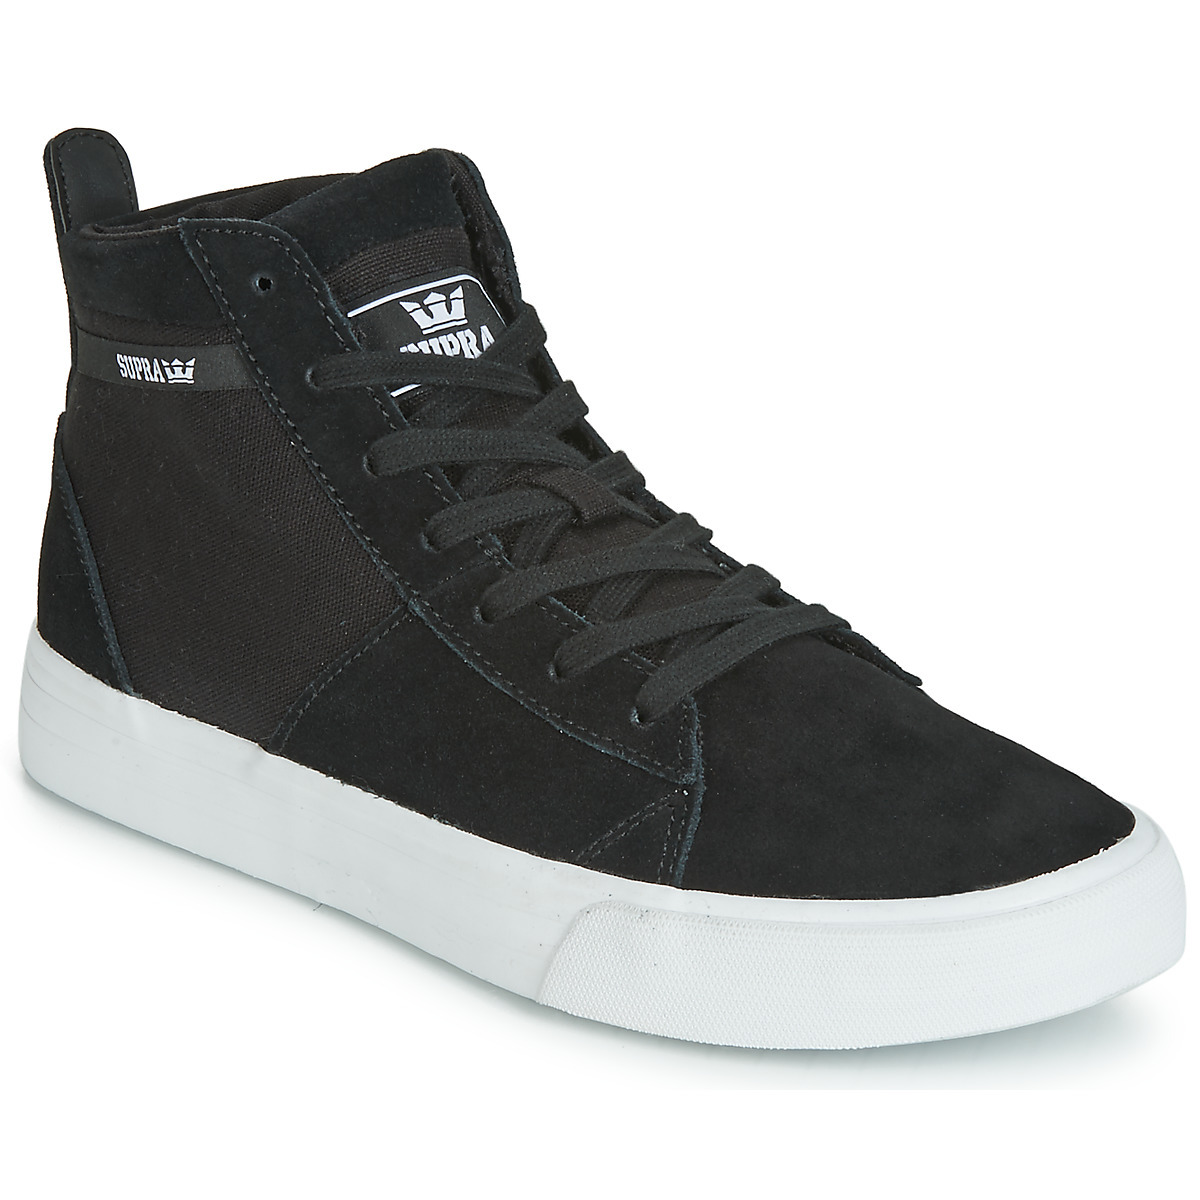 Spartoo - Sneakers in Black for Women by Supra GOOFASH